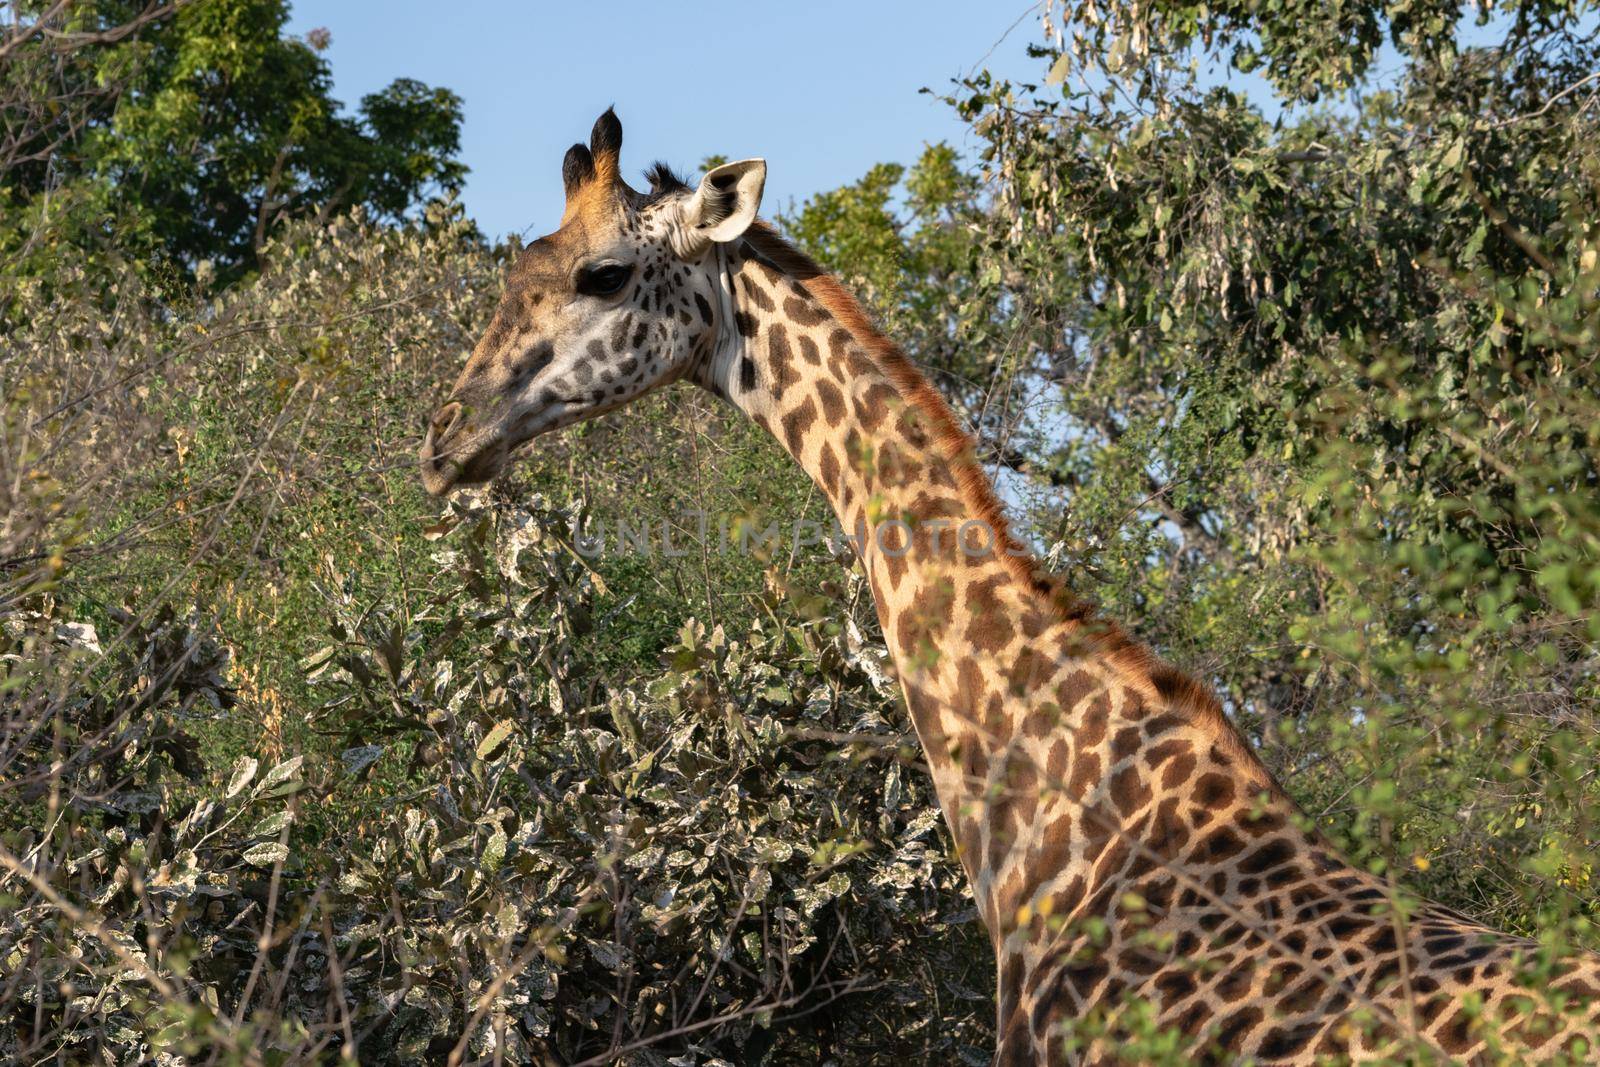 A close-up of a huge giraffe eating in the bush